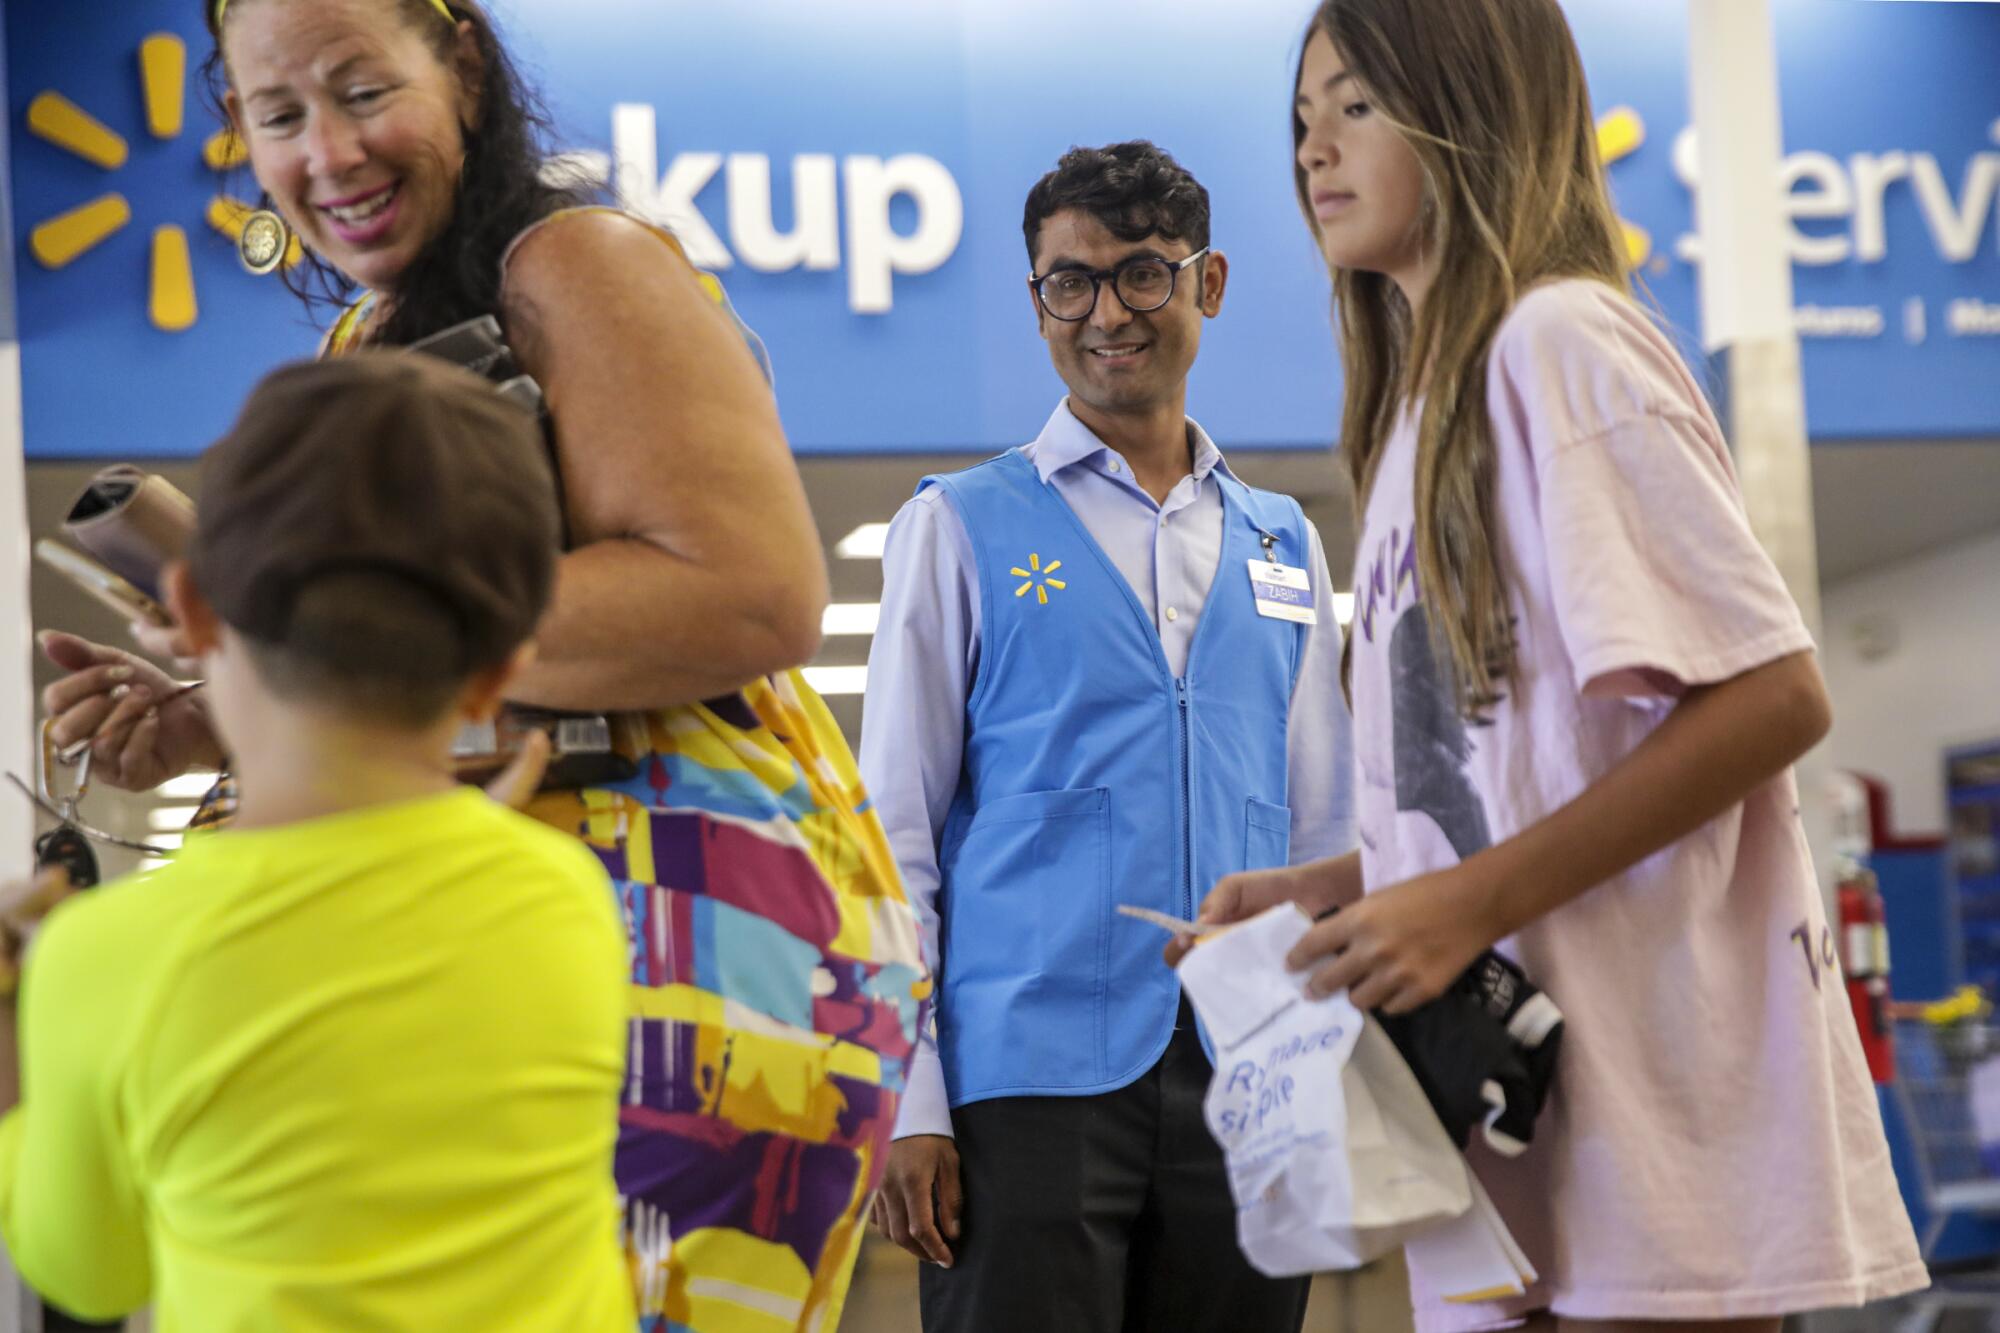 Zabih Khan, center, who fled Afghanistan with his 4-year-old brother, gets job training at Walmart in El Cajon.